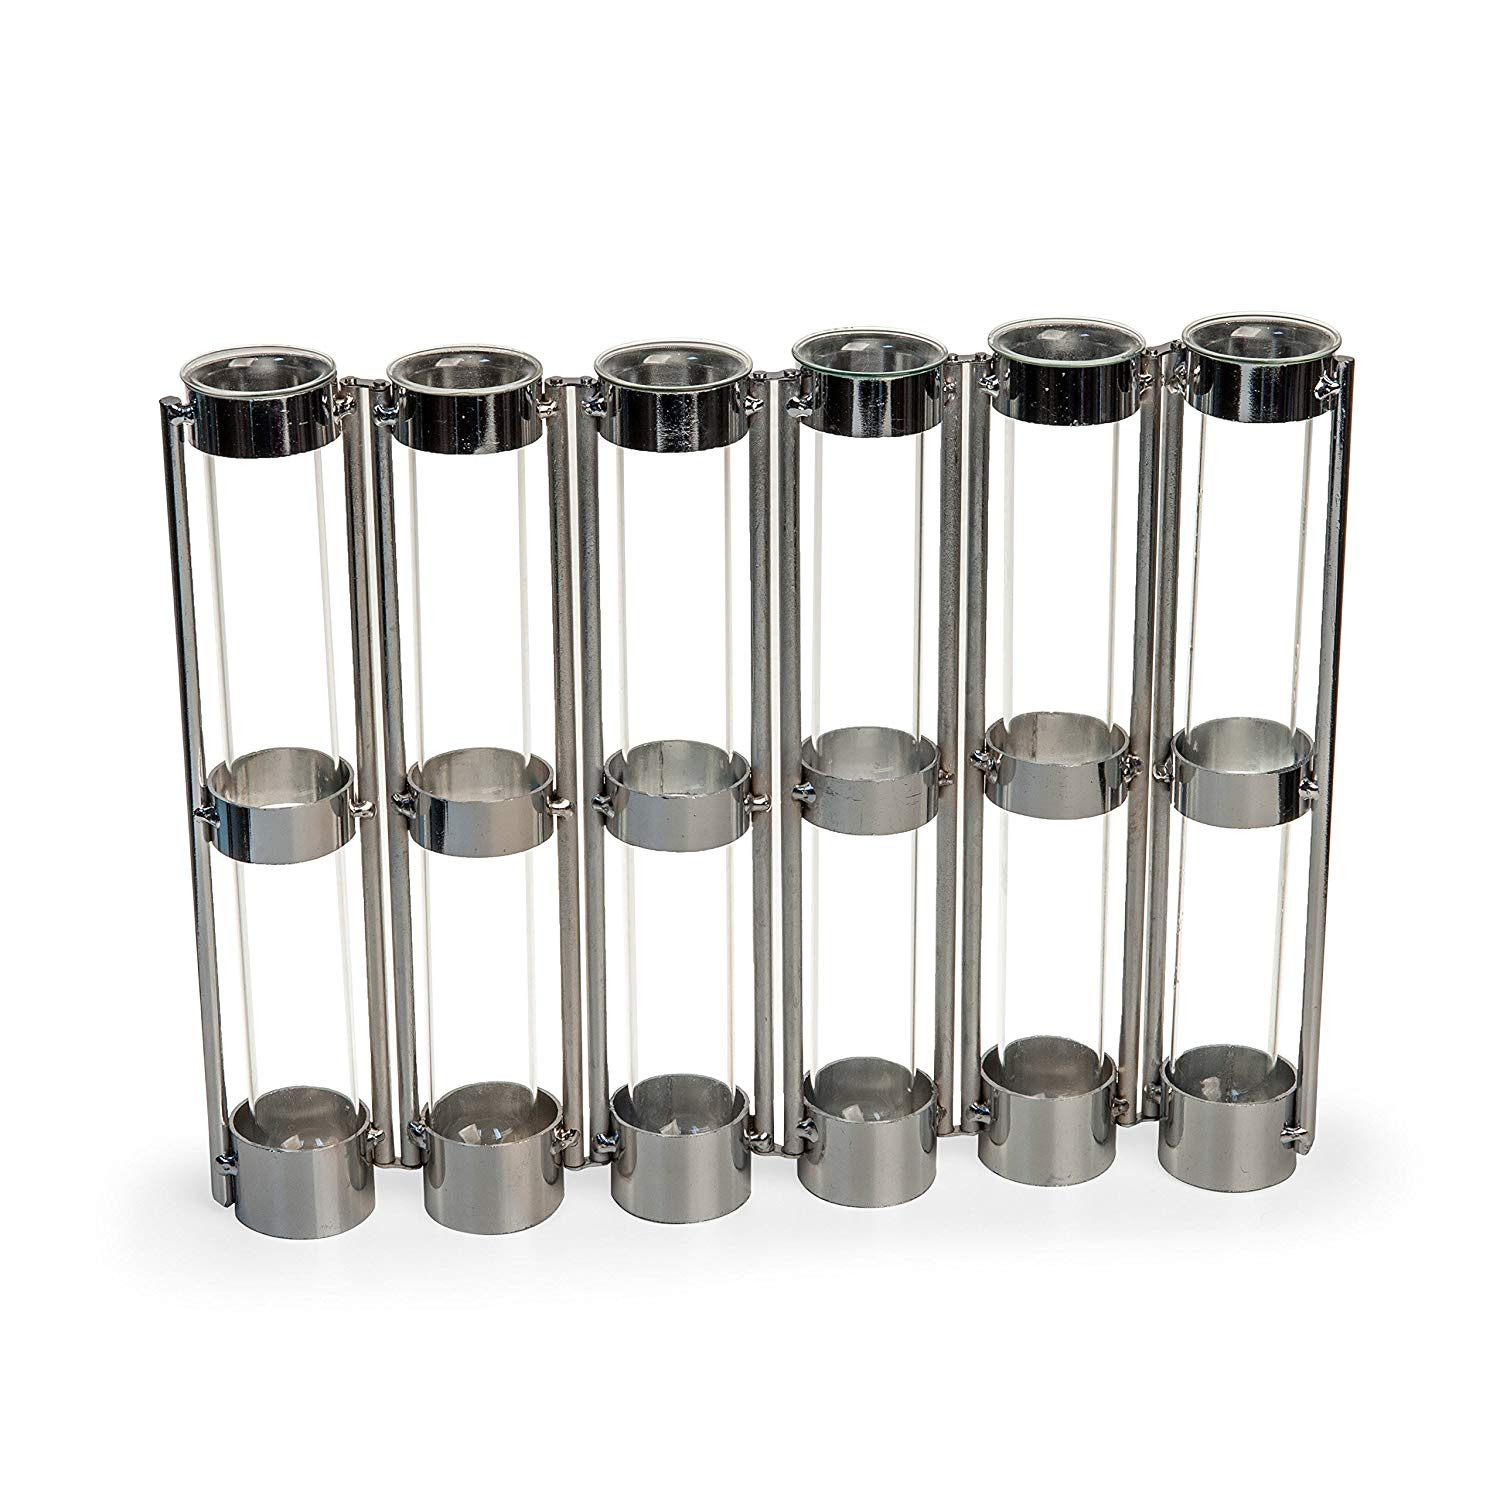 3 Tiered Cylinder Vases Of Amazon Com Danya B Metallic Six Tube Hinged Bud Vase In Silver Intended for Amazon Com Danya B Metallic Six Tube Hinged Bud Vase In Silver Finish Home Kitchen